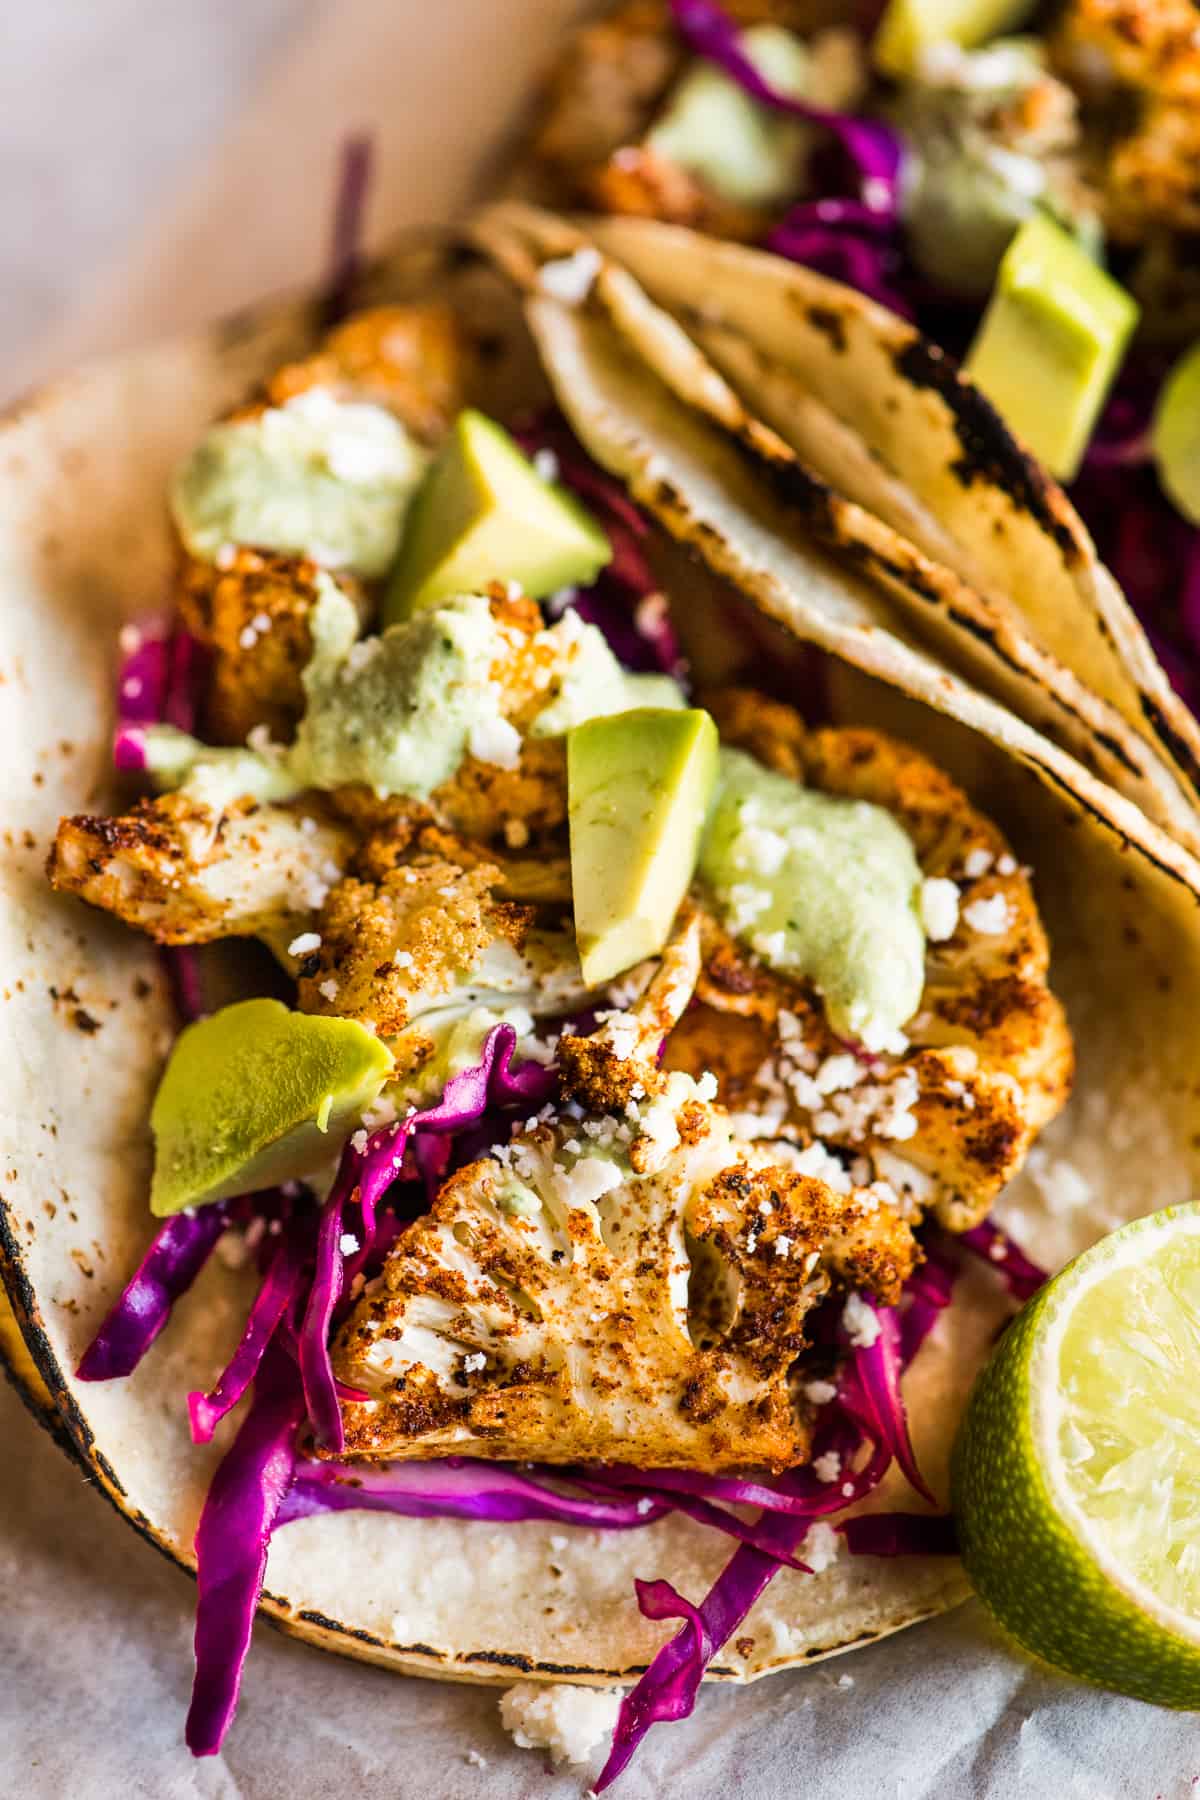 Cauliflower tacos topped with avocado, thinly sliced red cabbage, and queso fresco.